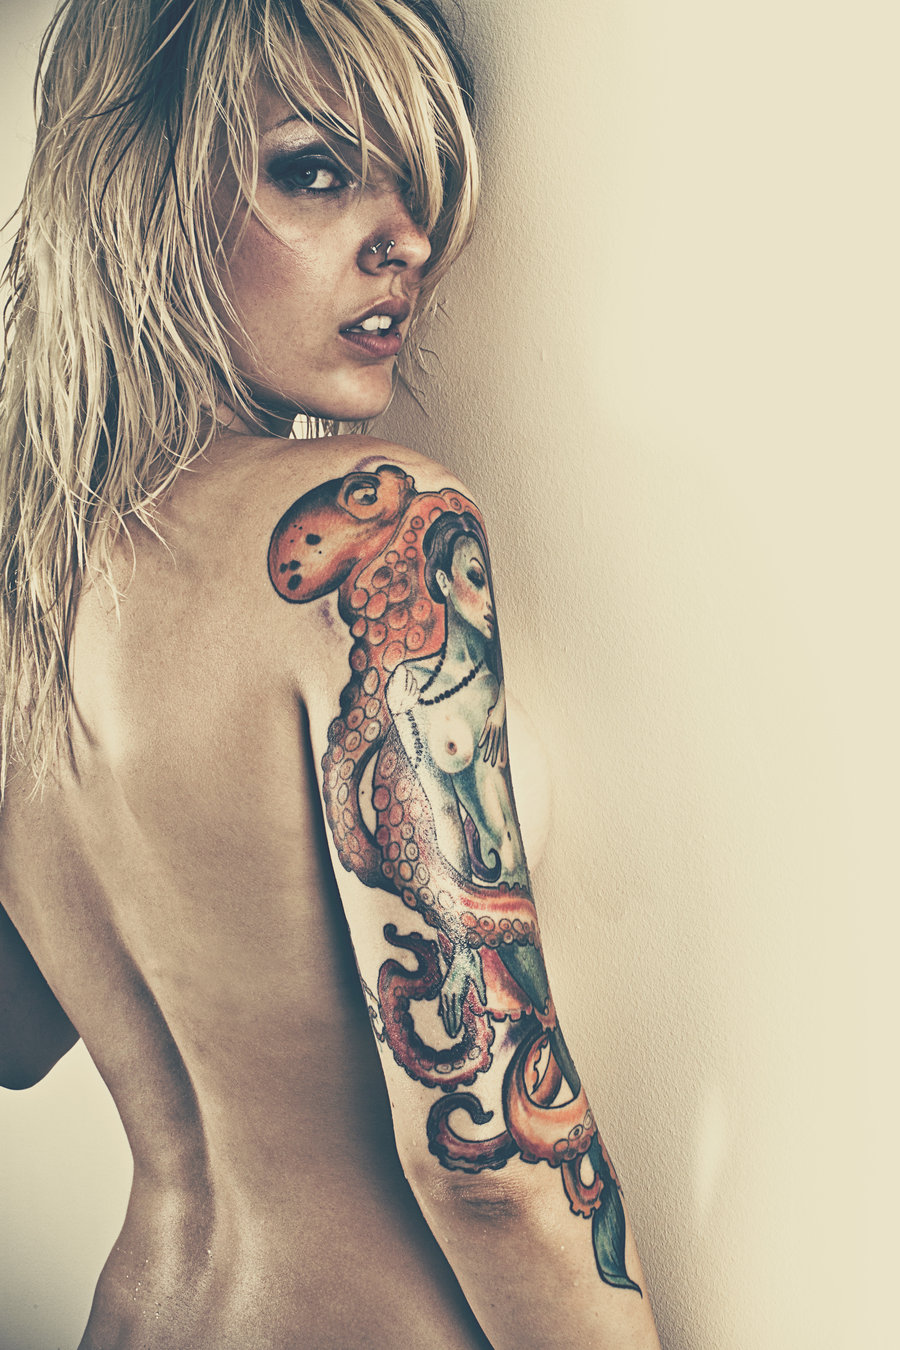 Nude women with sleeve tattoos